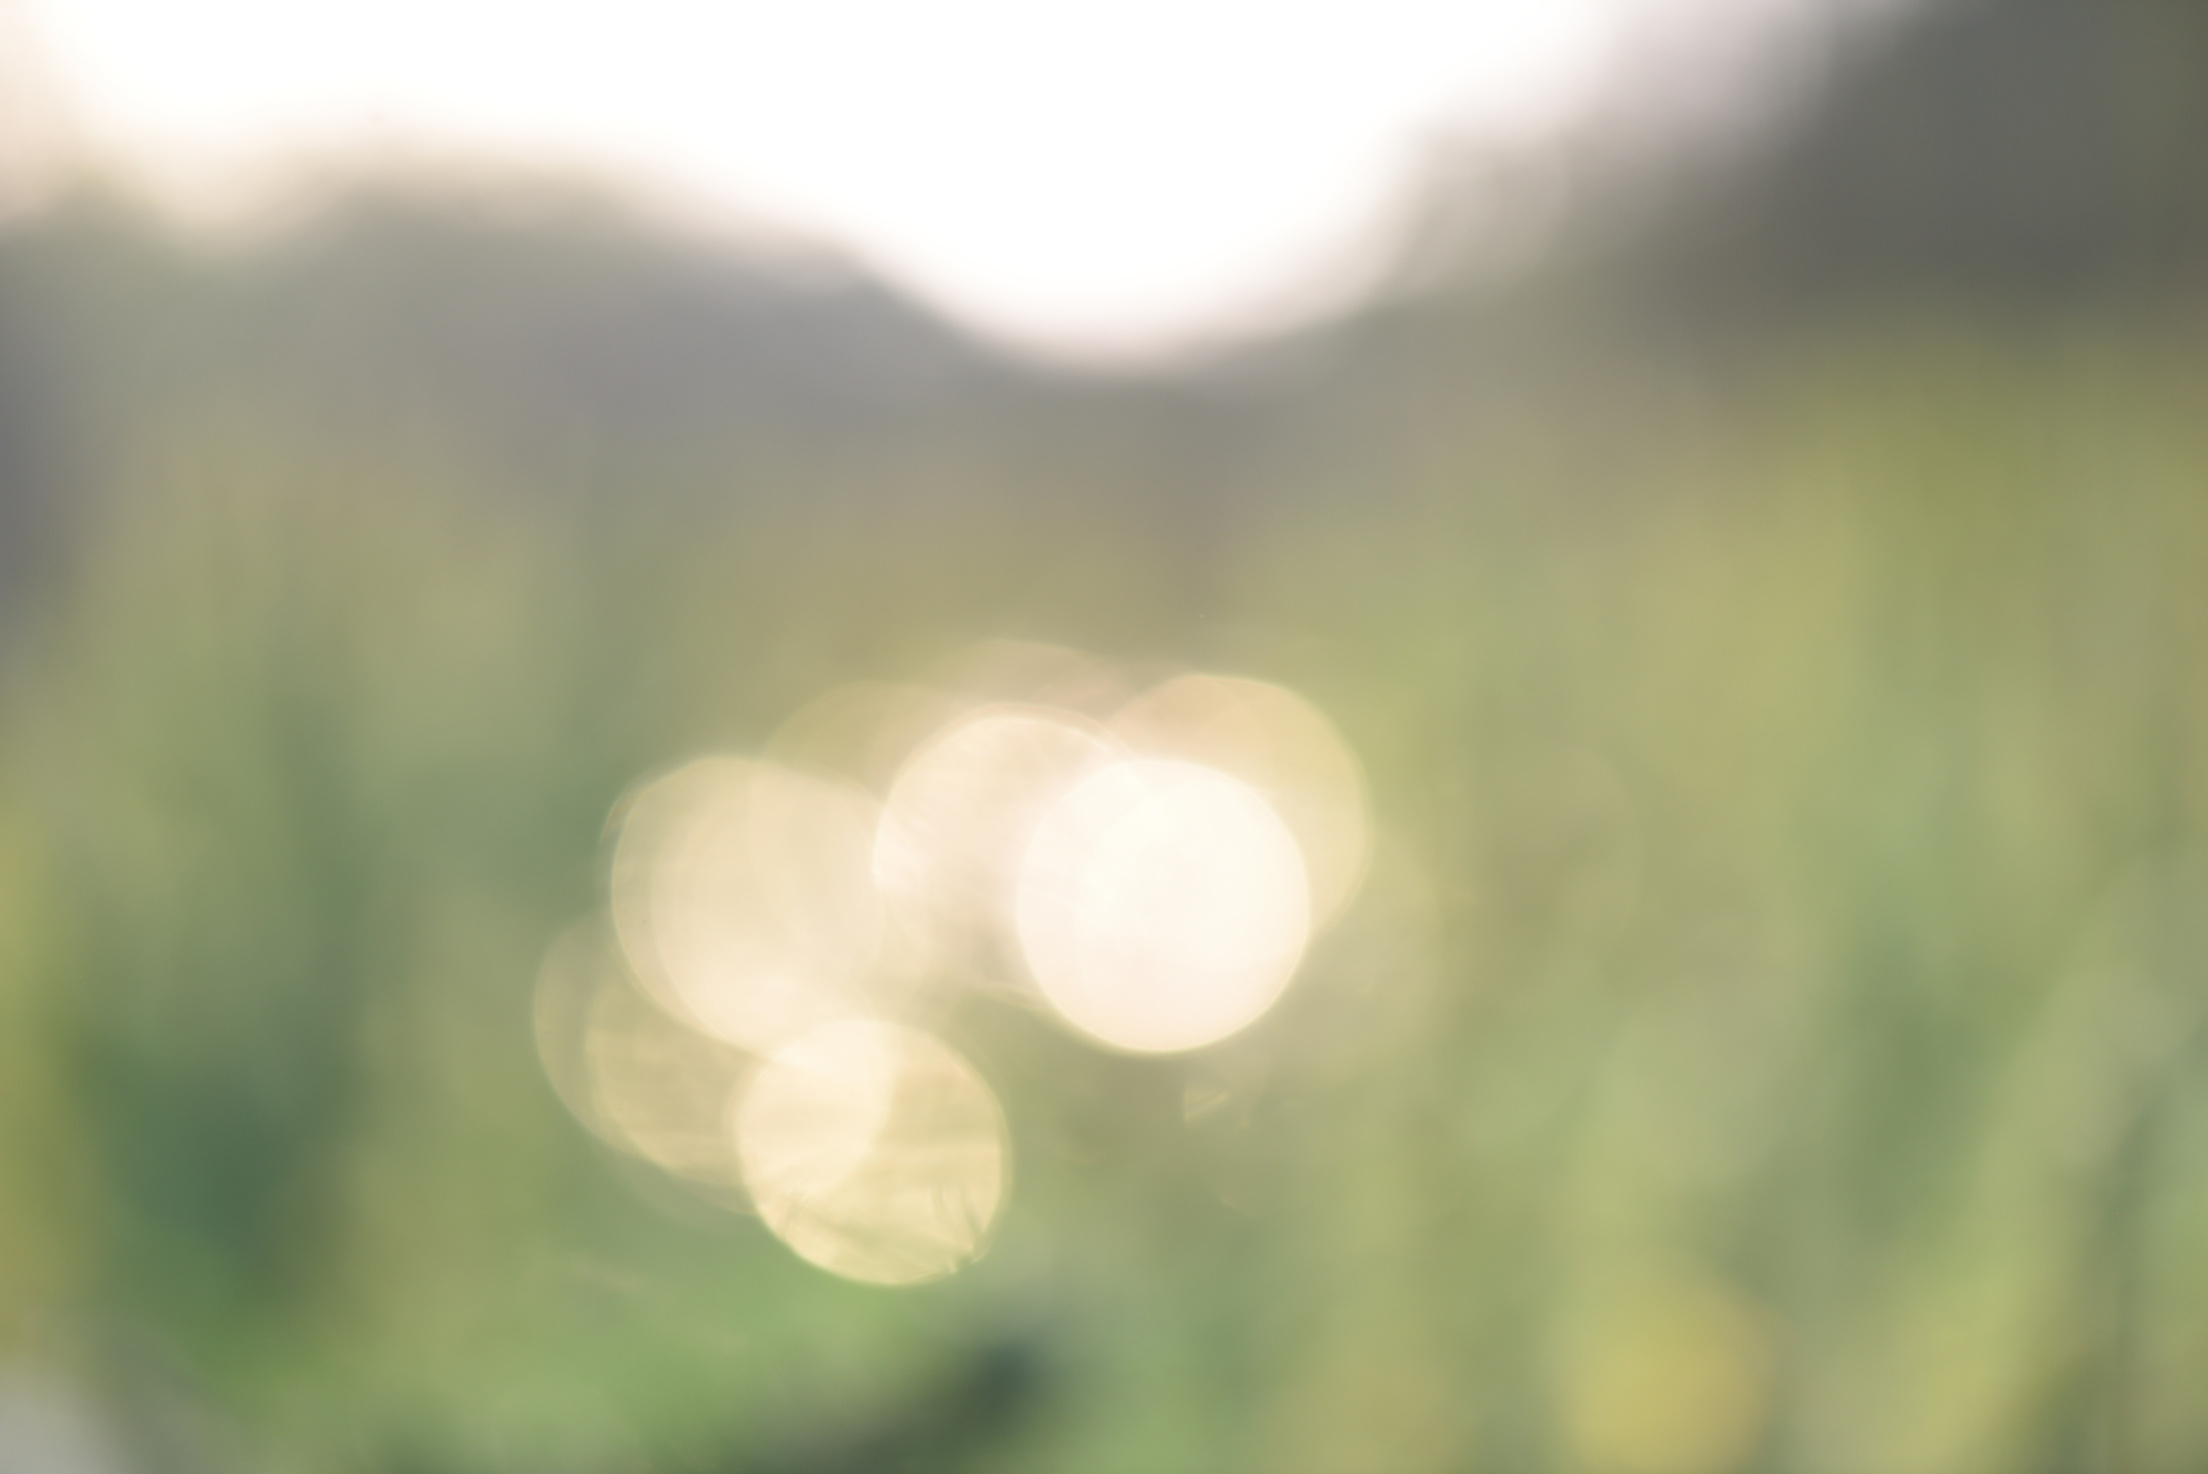 Field blurred plant background with solar flares